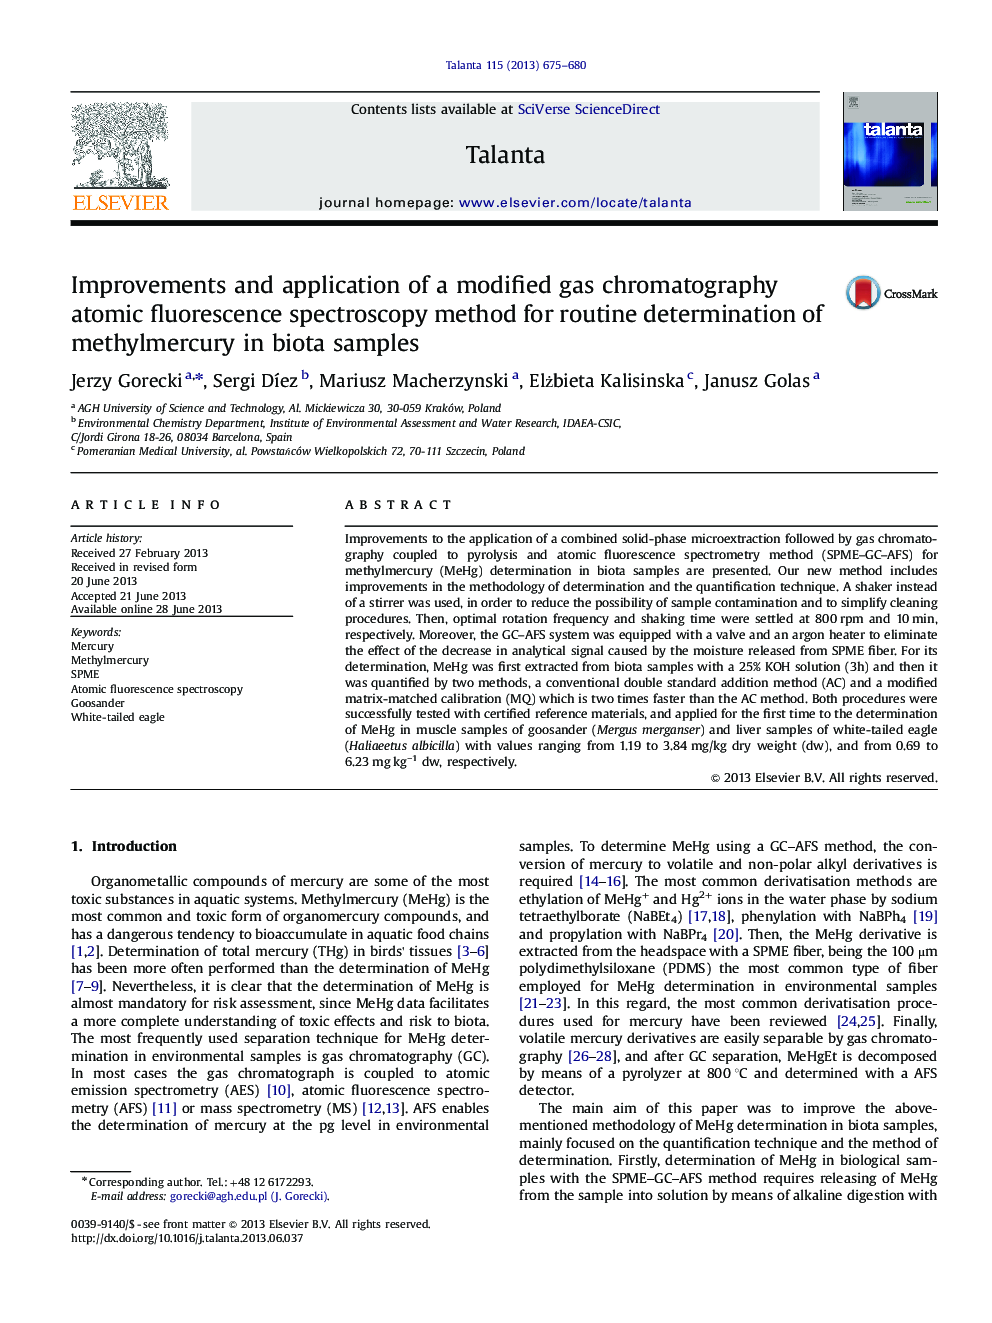 Improvements and application of a modified gas chromatography atomic fluorescence spectroscopy method for routine determination of methylmercury in biota samples